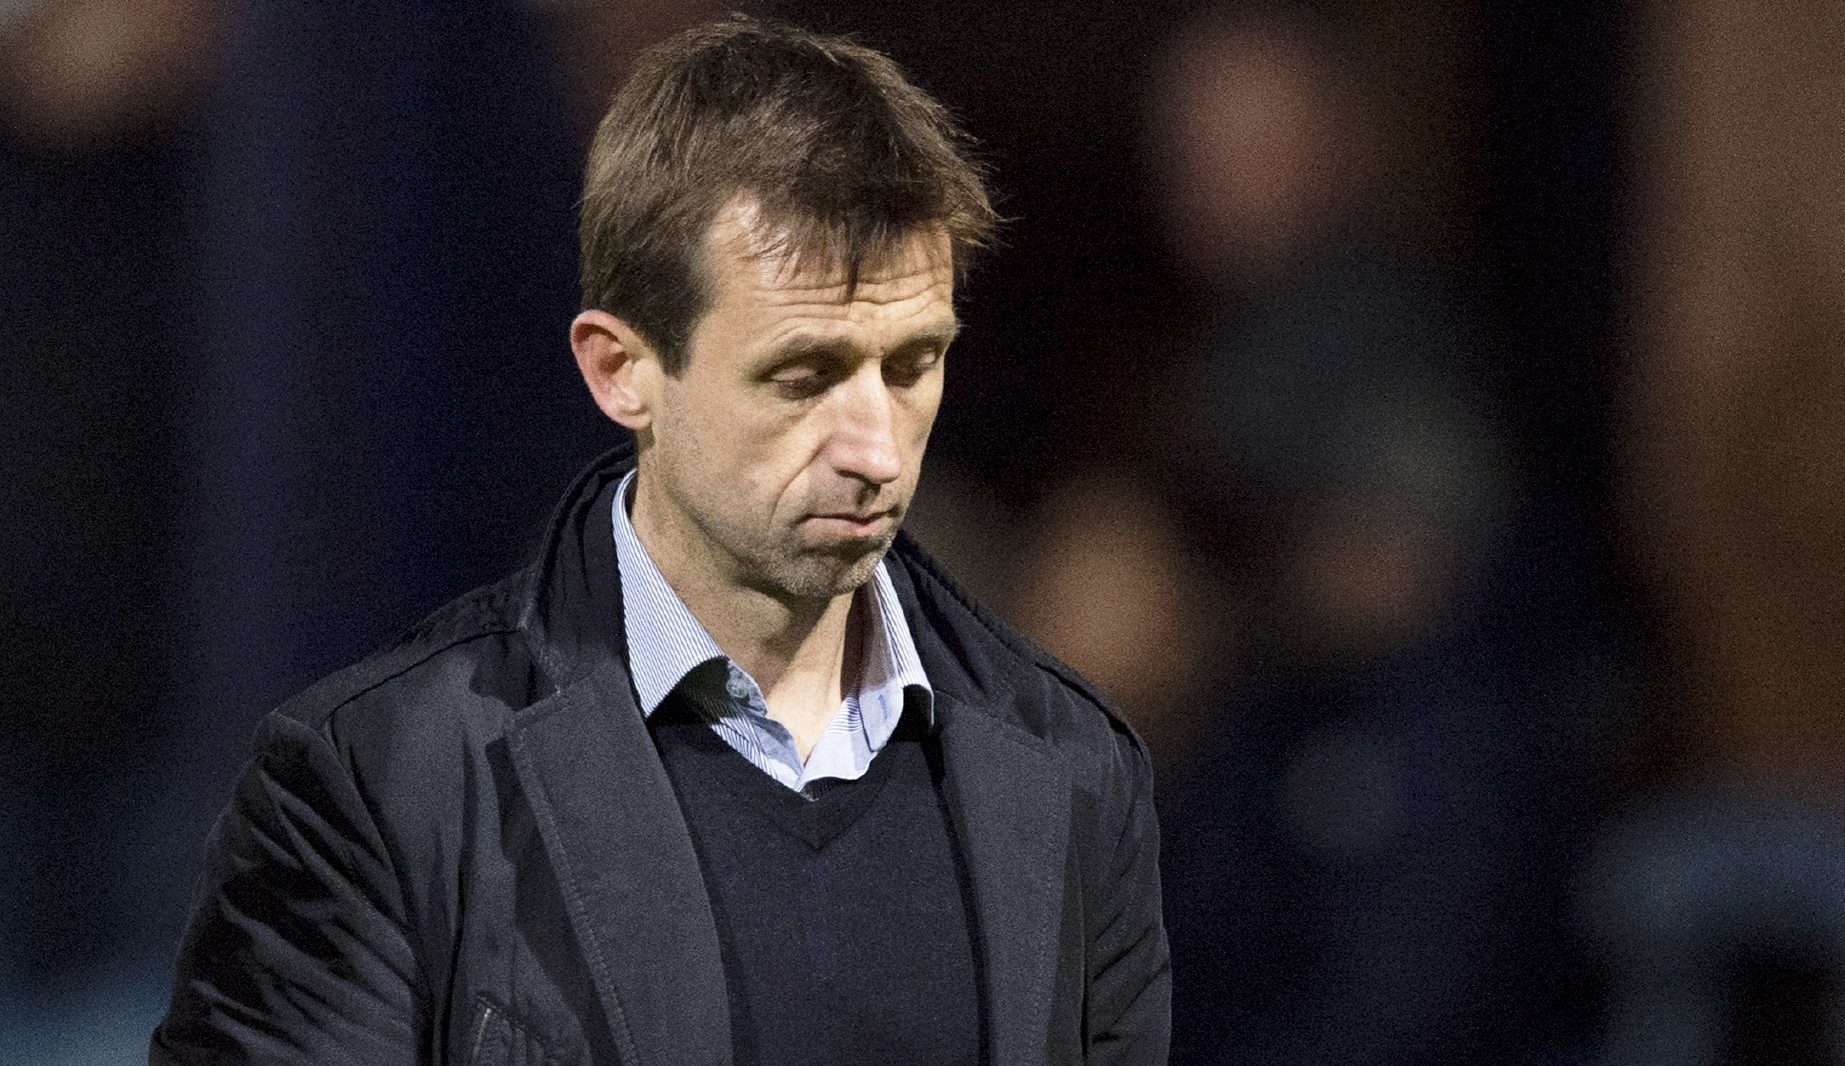 The public has had their say on who should replace the sacked Neil McCann.